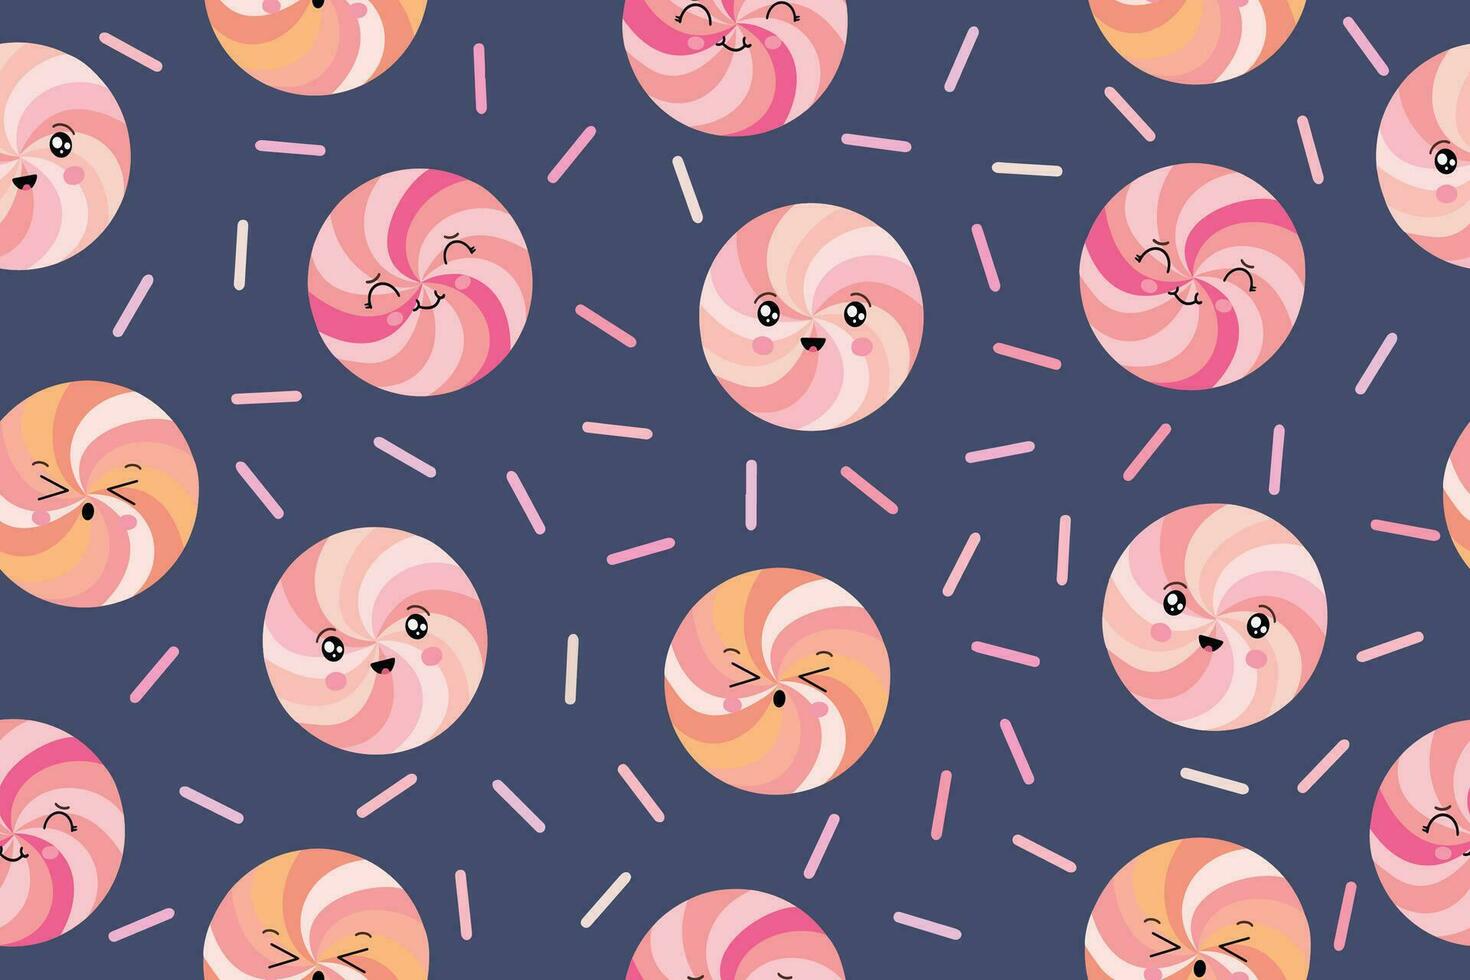 Seamless pattern made of colorful lollipops. Vector illustration